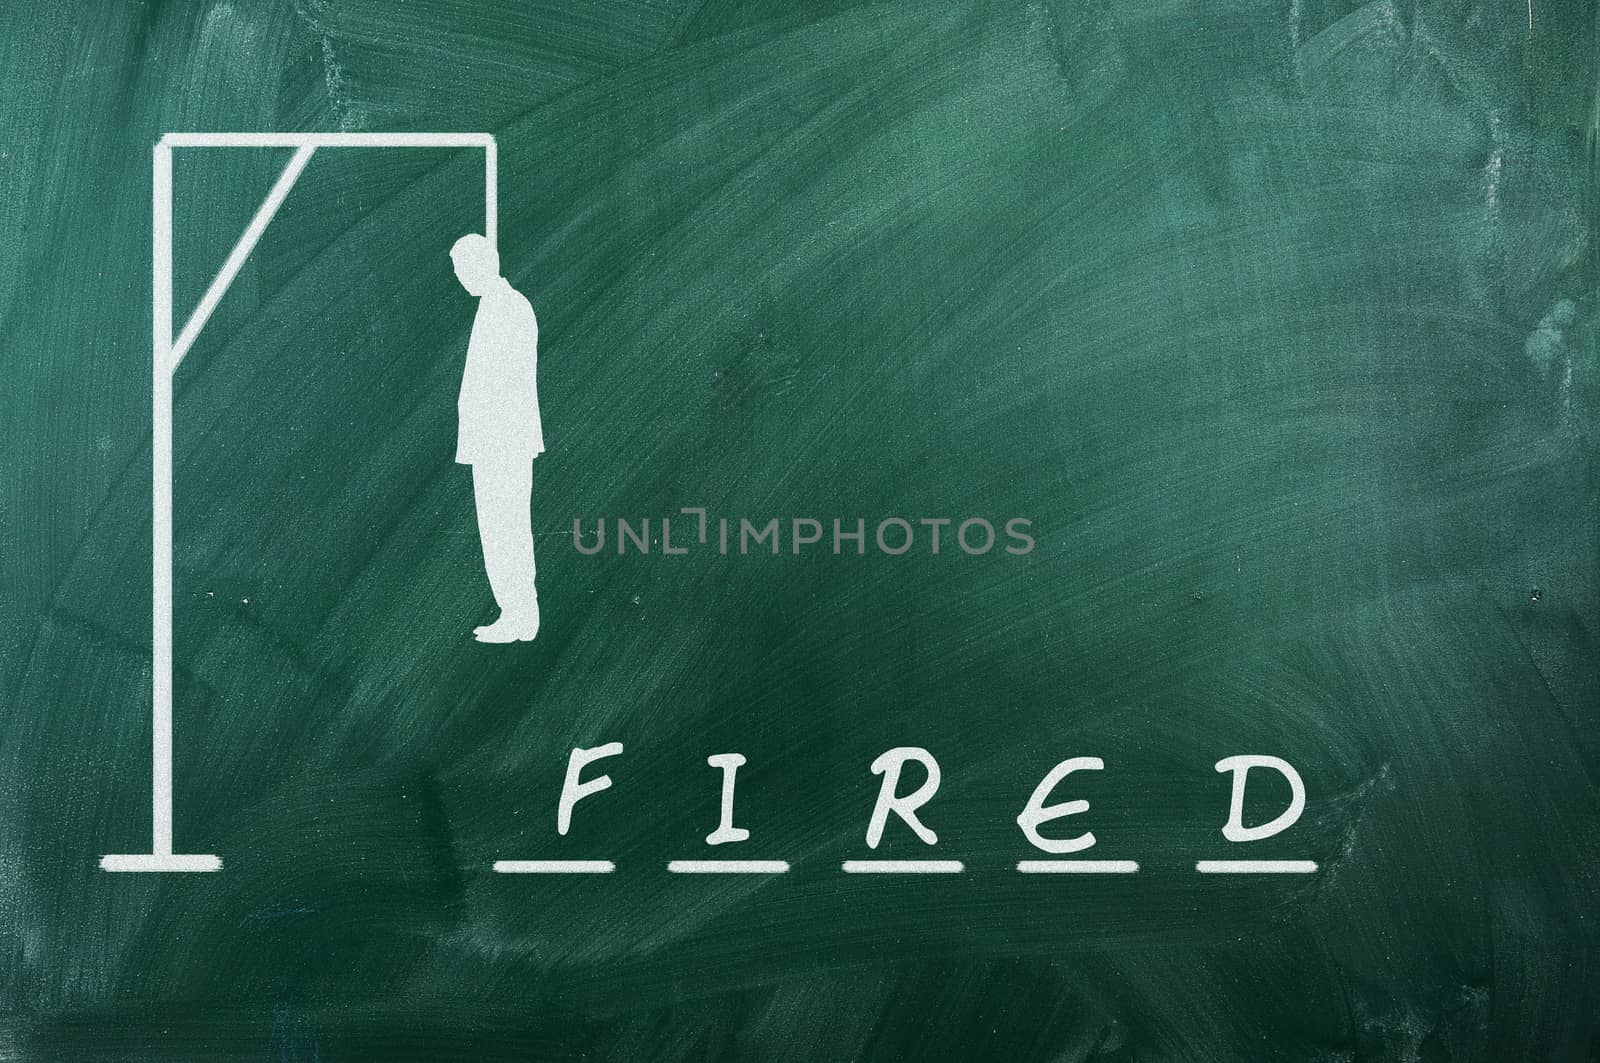 Hangman game on green chalkboard ,concept of fired